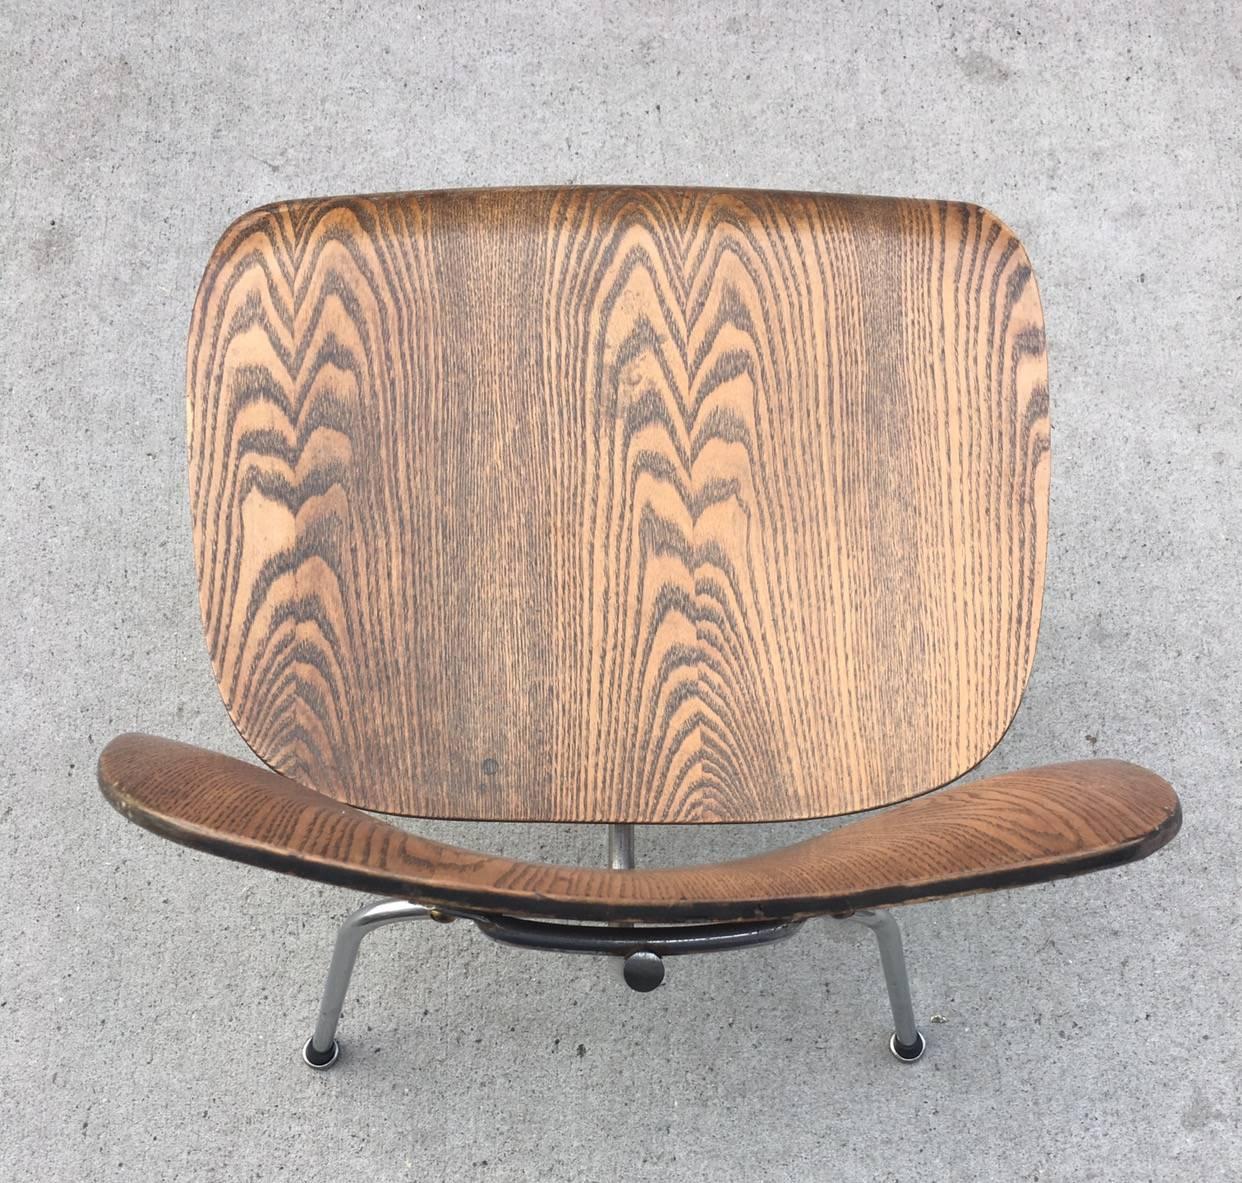 Early 1950s Herman Miller Eames Ash DCM dining chair. Some of the most spectacular grains and patina we have ever seen in this finish. Original mounts have been reapplied. New glides.